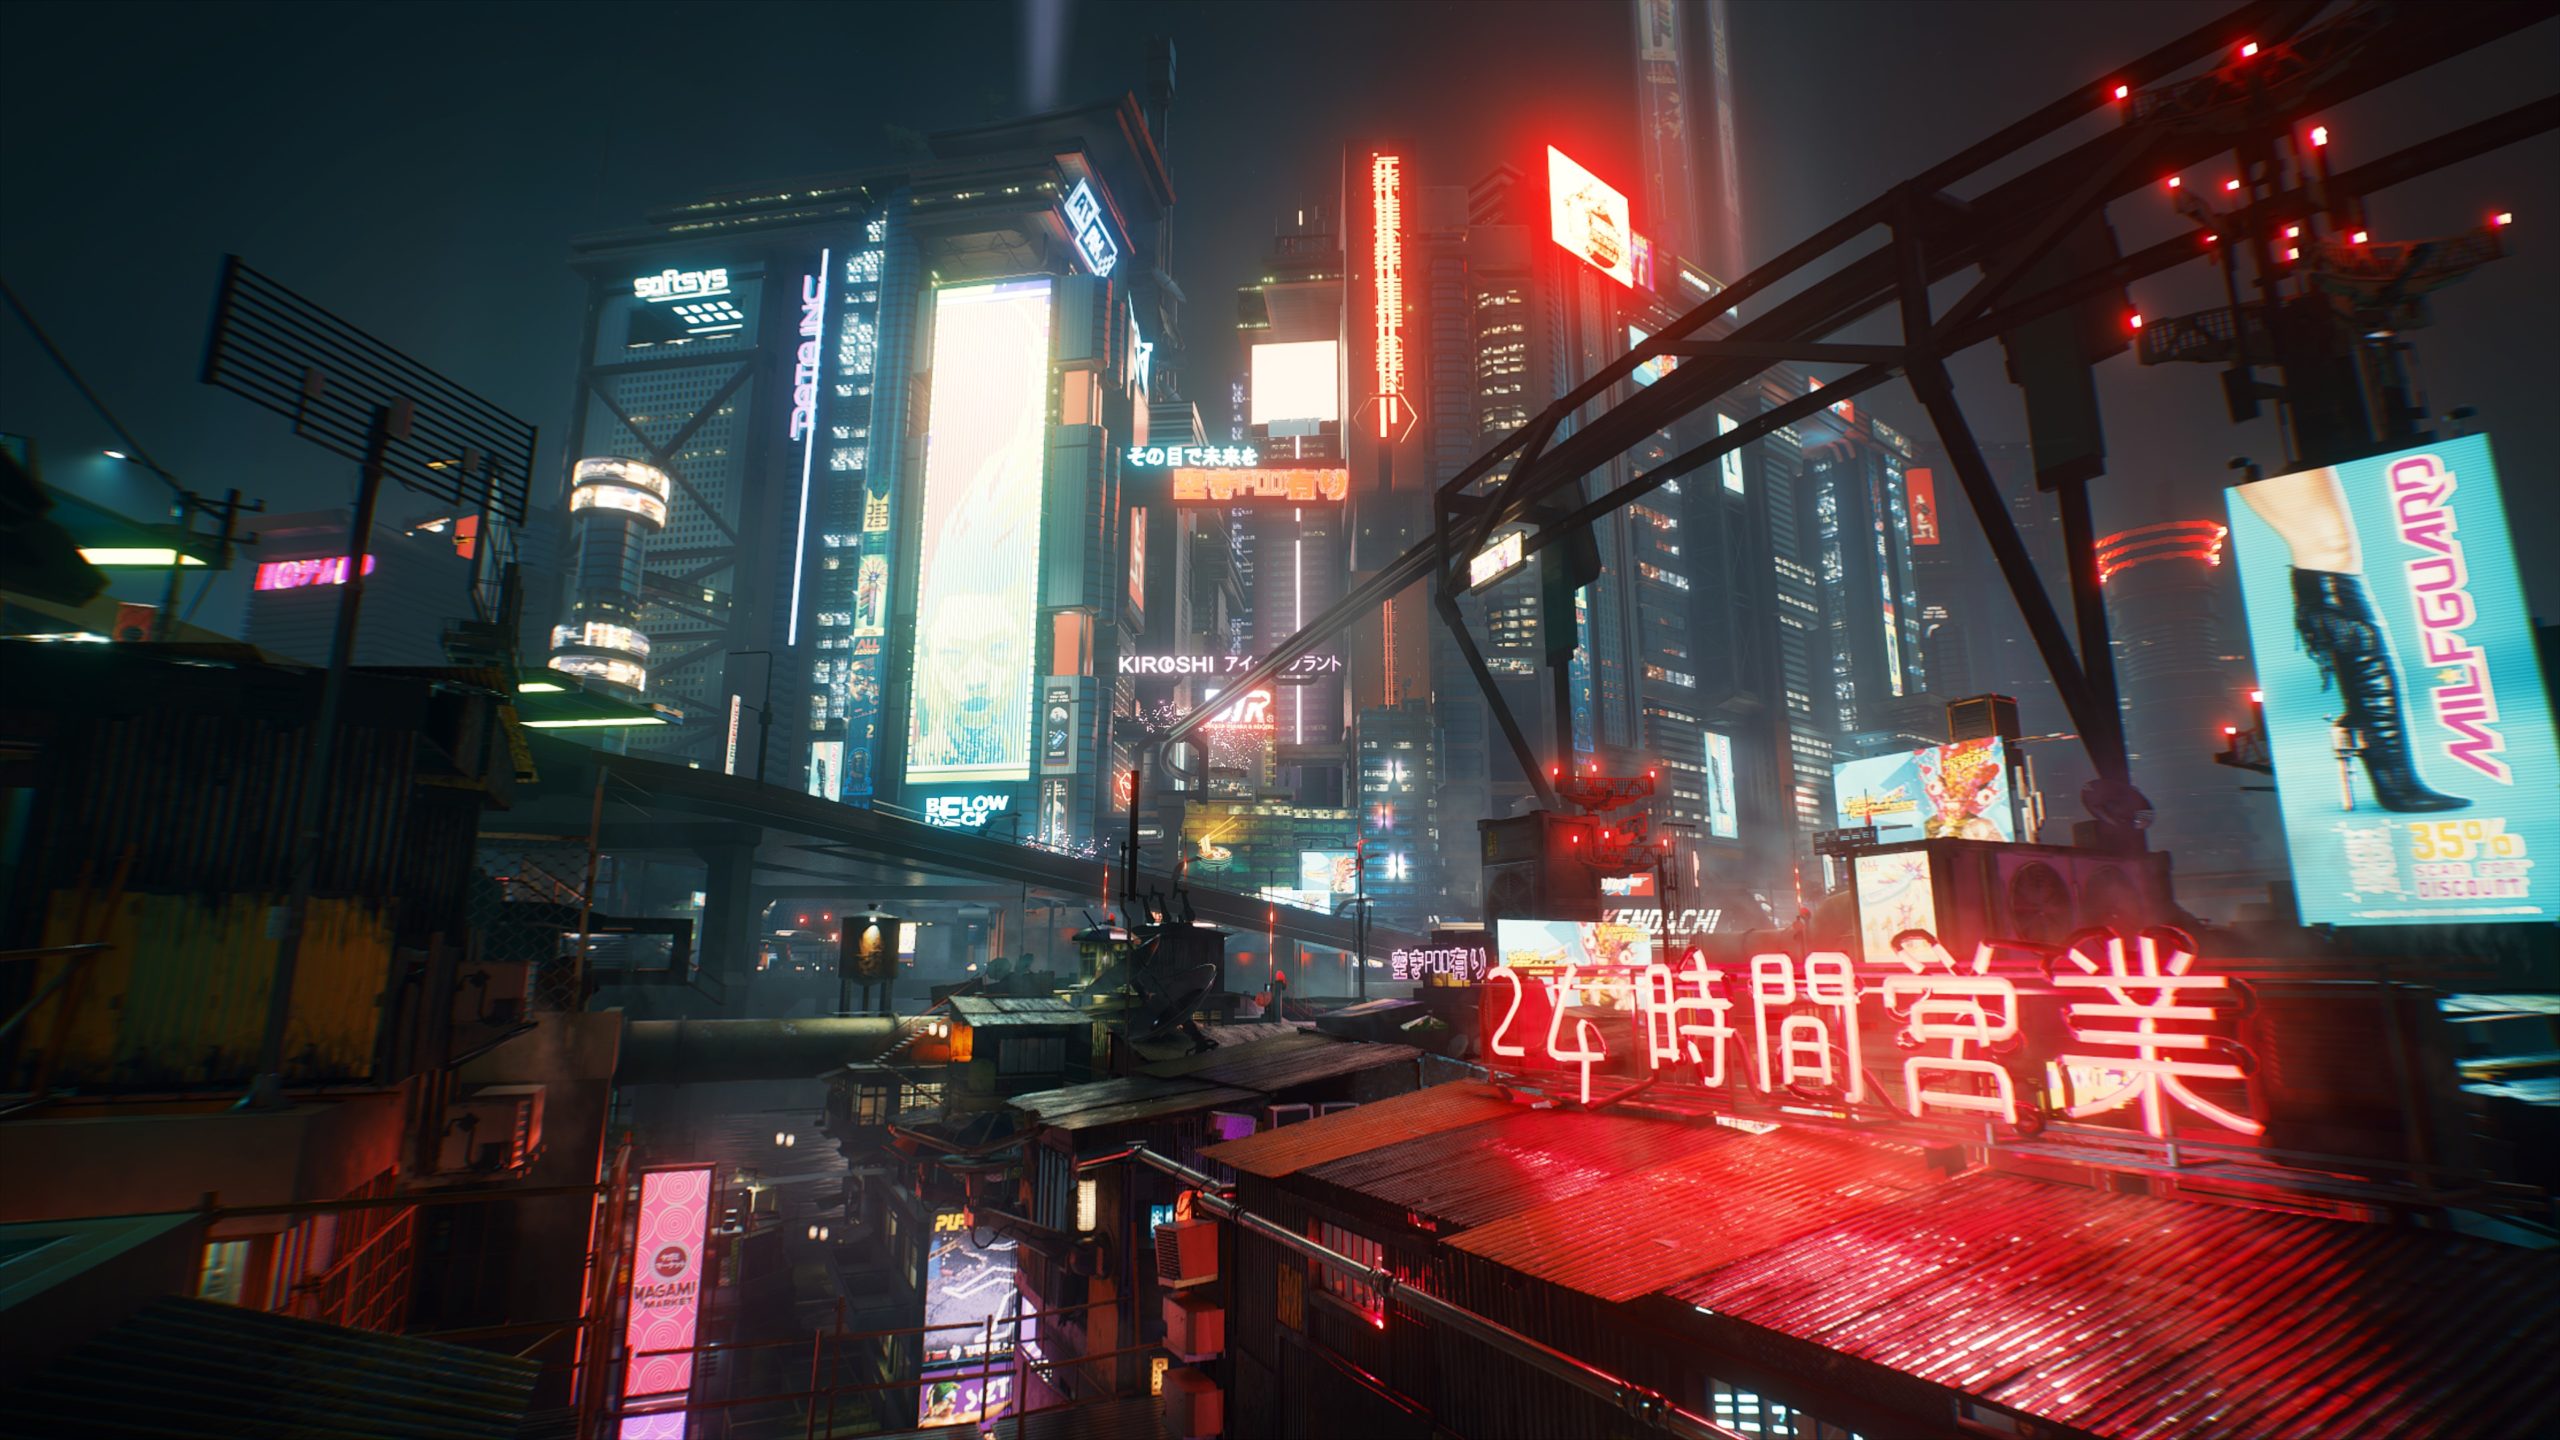 Scarlet Nexus is doing with its futuristic cityscape what Cyberpunk 2077  couldn't